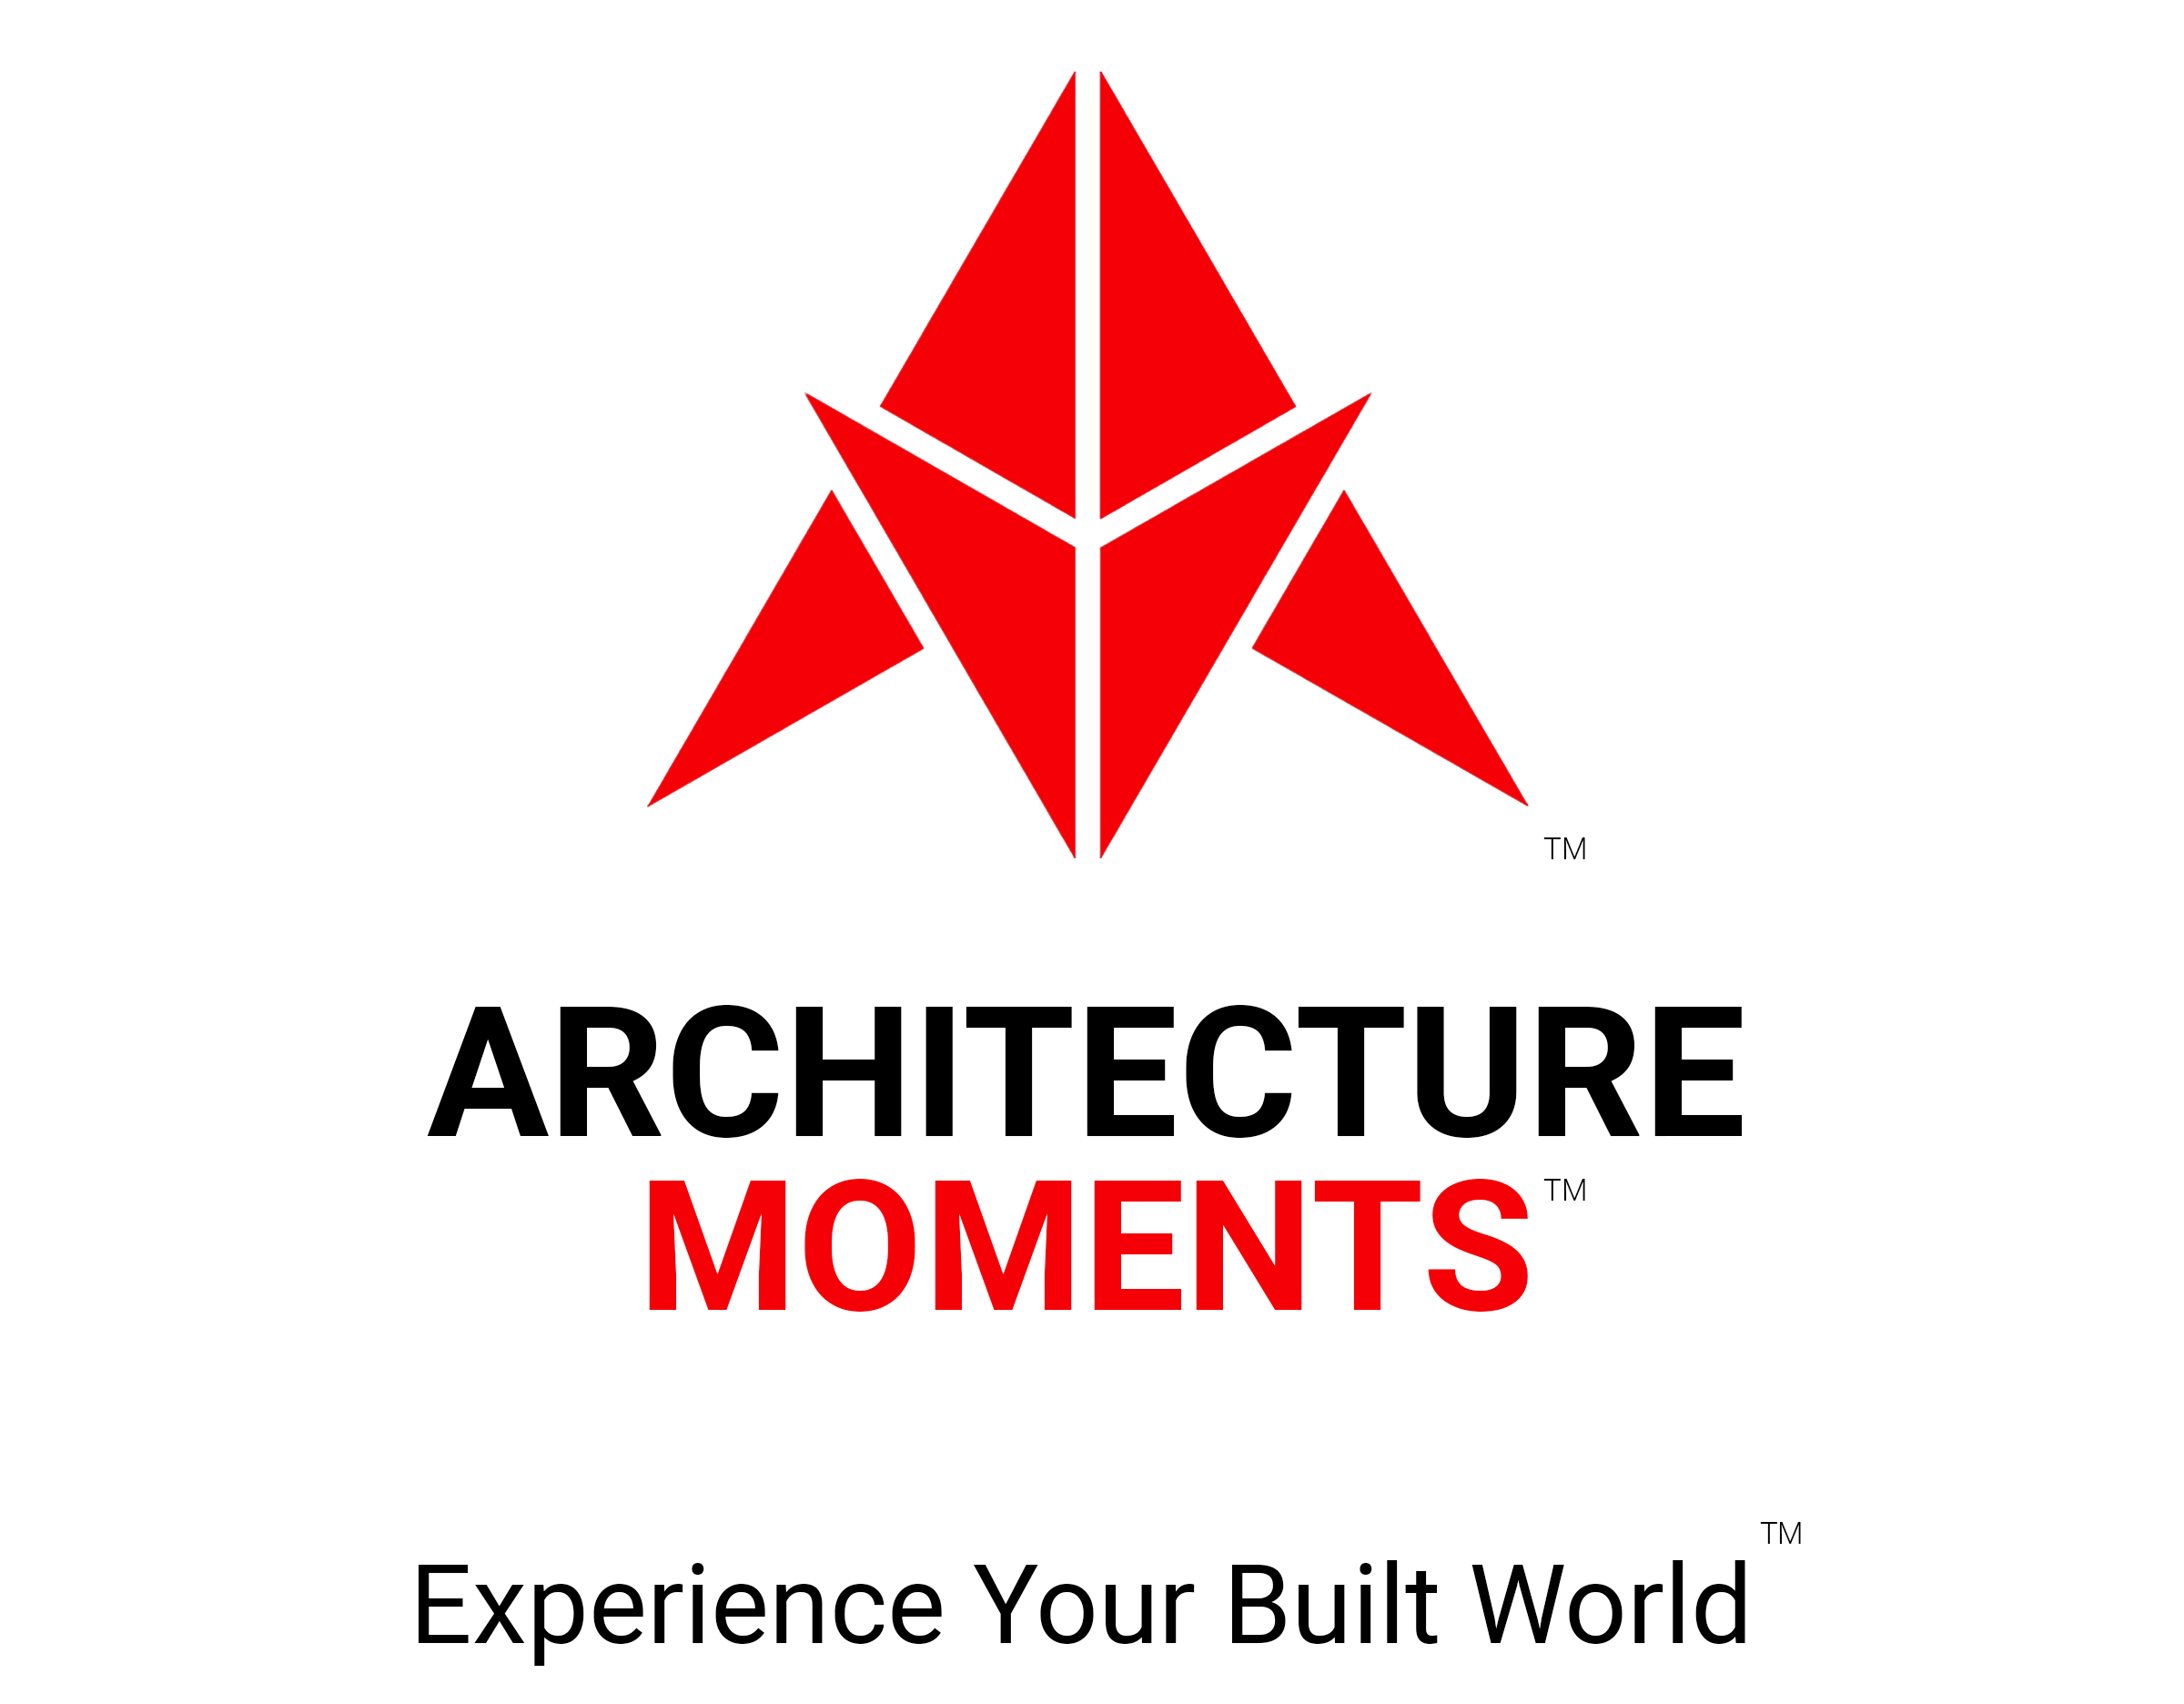 ARCHITECTURE MOMENTS - HIVE BLOG POST FOOTER LOGO.png